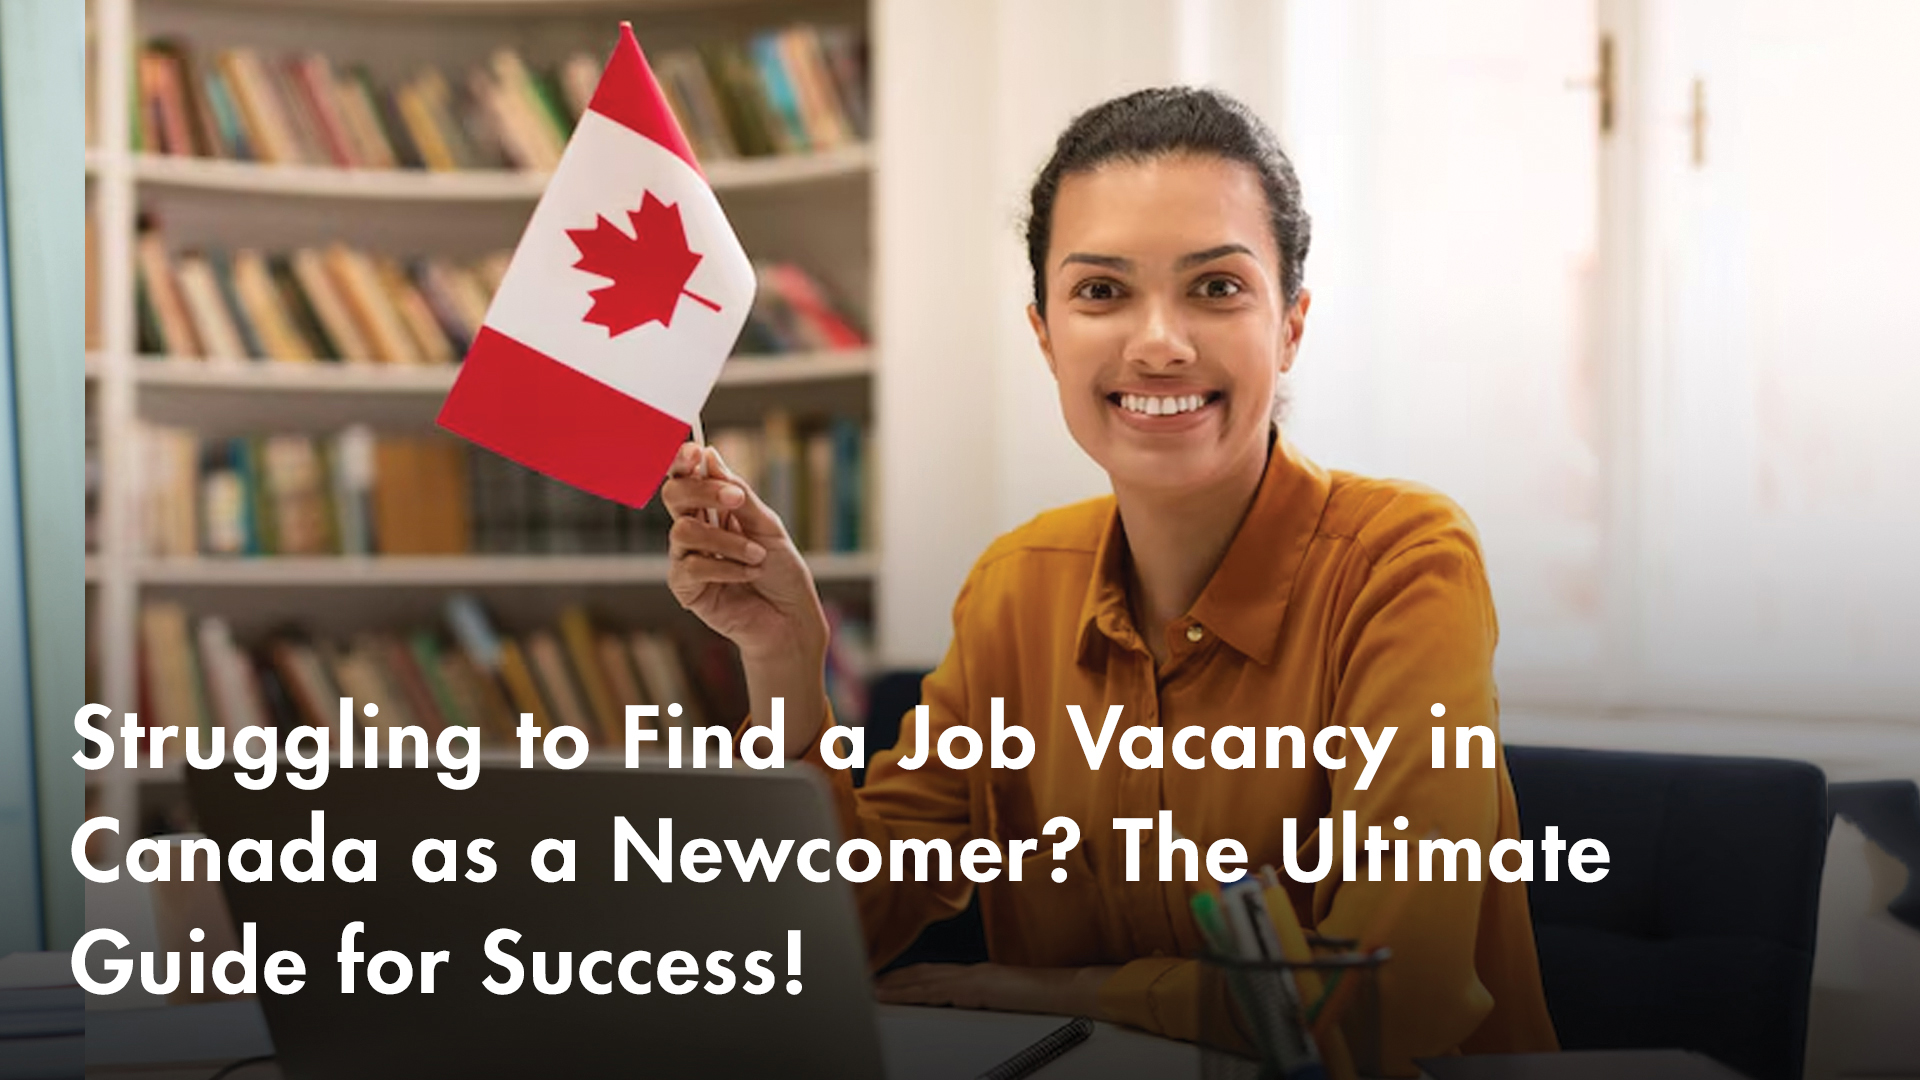 Struggling To Find A Job Vacancy In Canada As A Newcomer? The Ultimate Guide To Success: